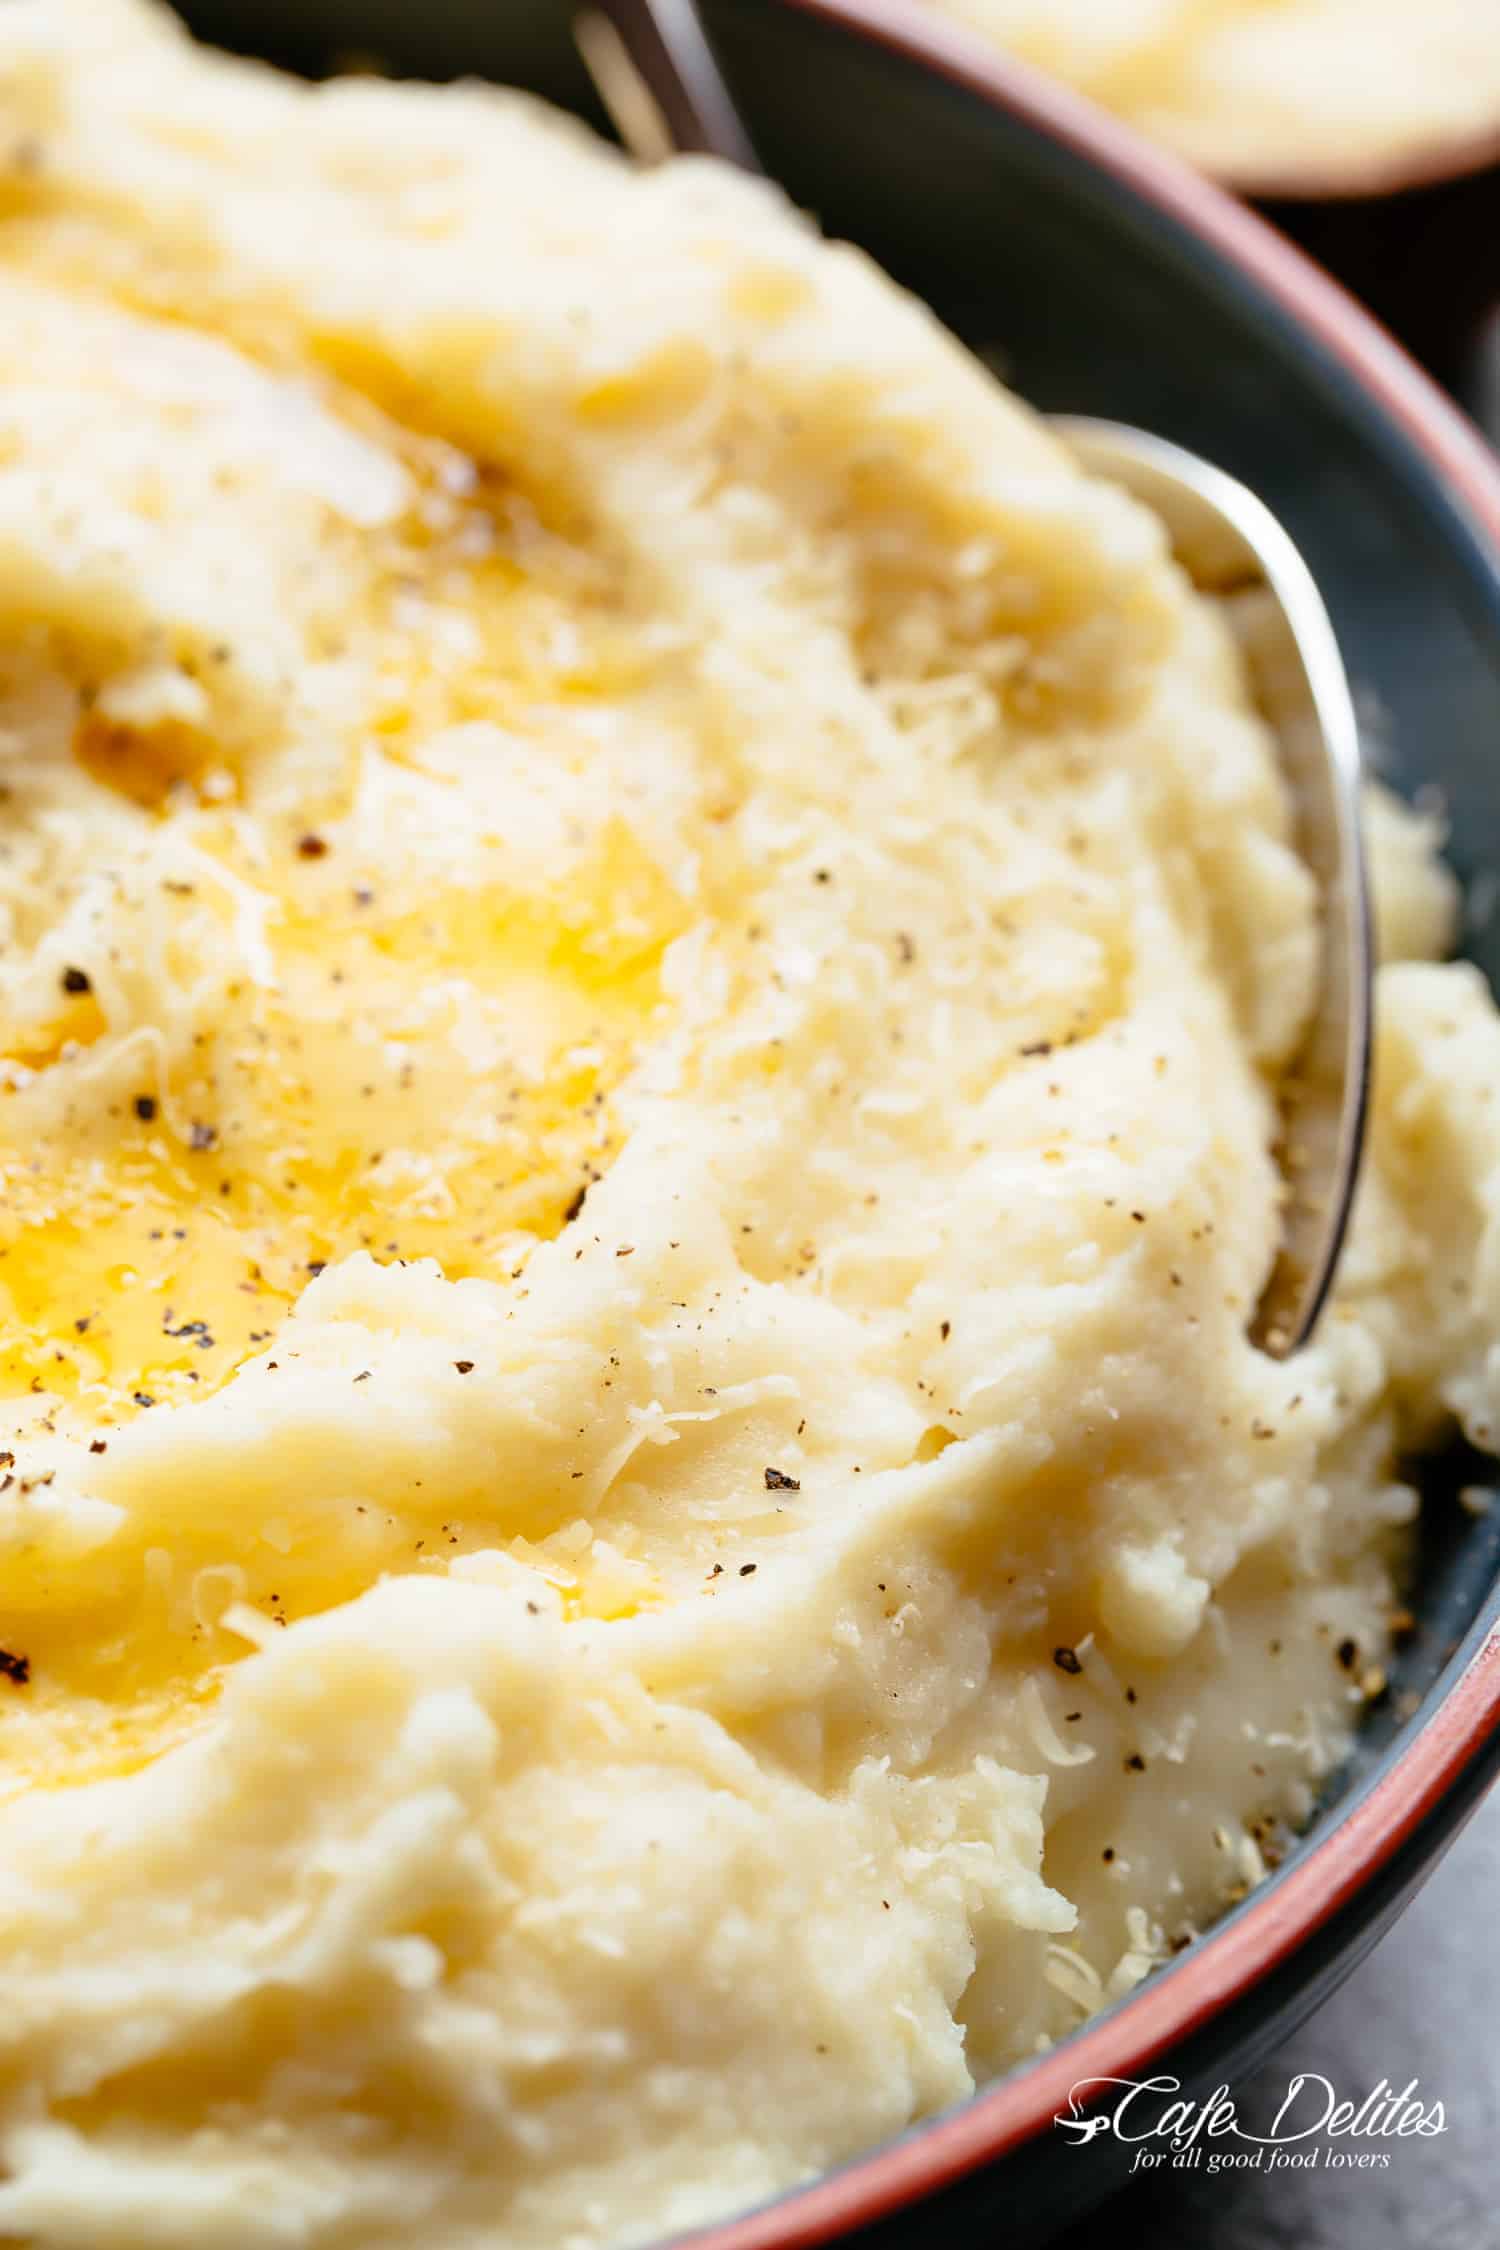 Keto approved CREAMY Mashed Cauliflower with Garlic, Sour Cream and Parmesan is the low carb side dish!